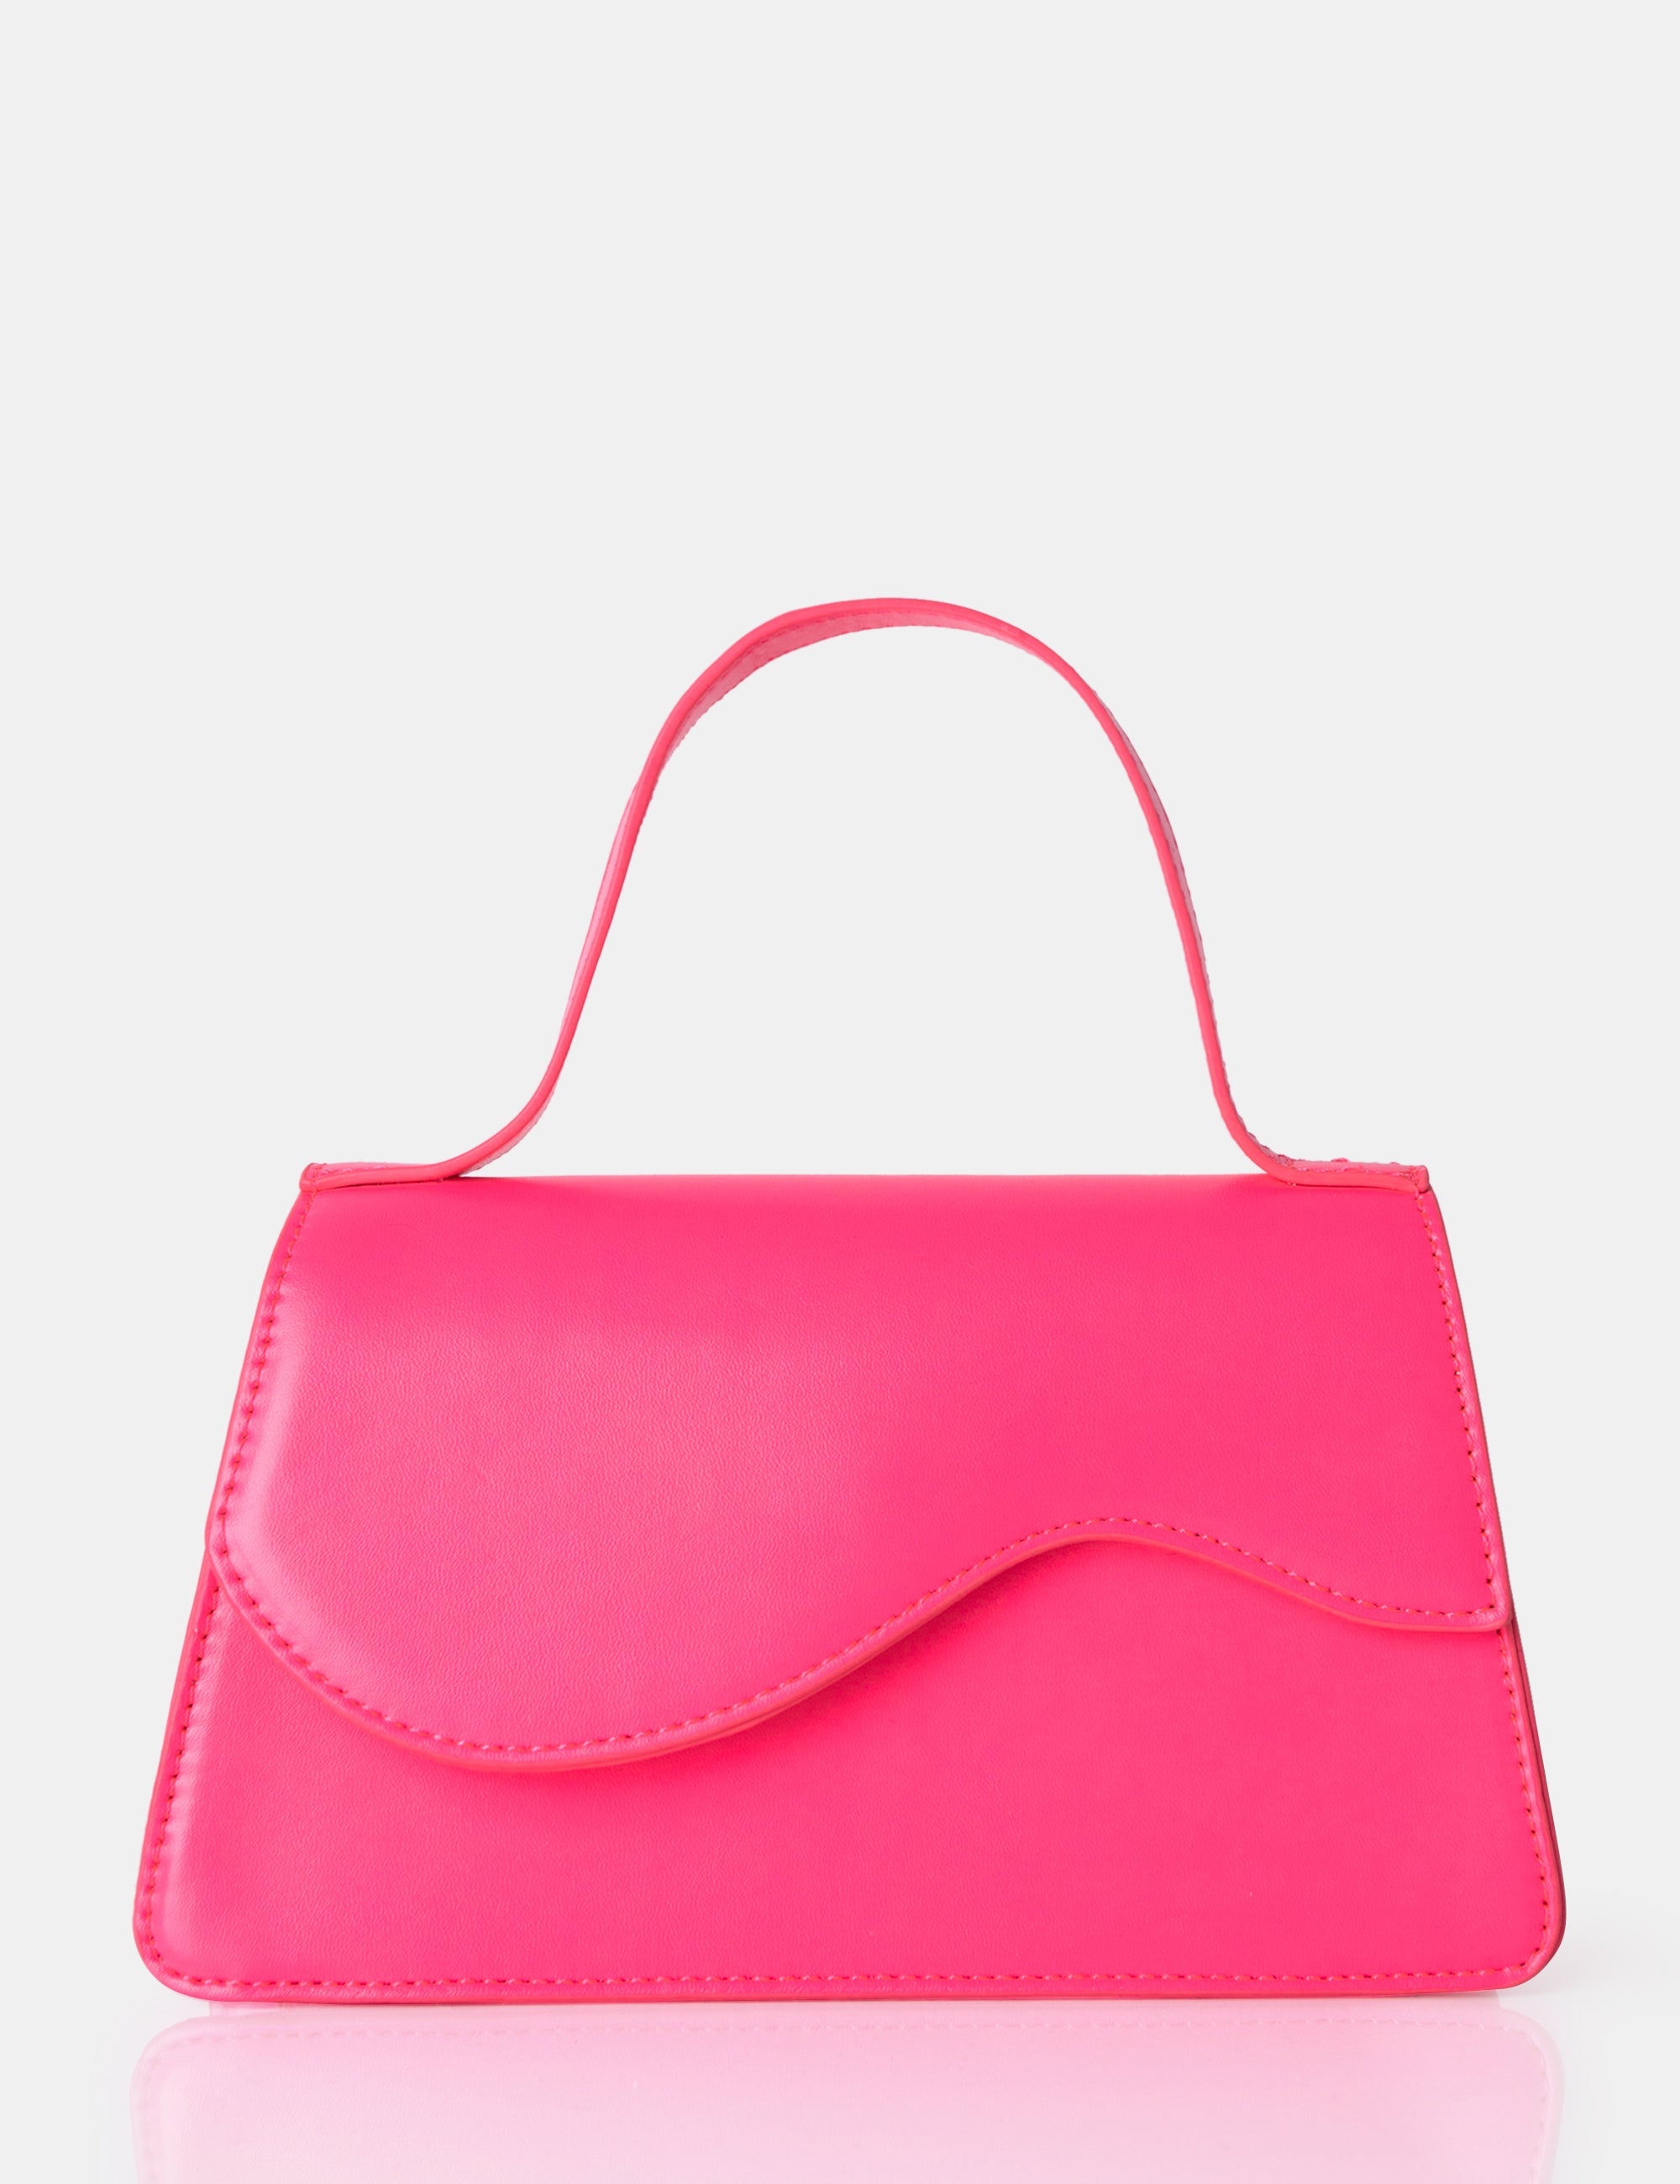 The Polly Bright Pink Croc Top Handle Mini Bag product